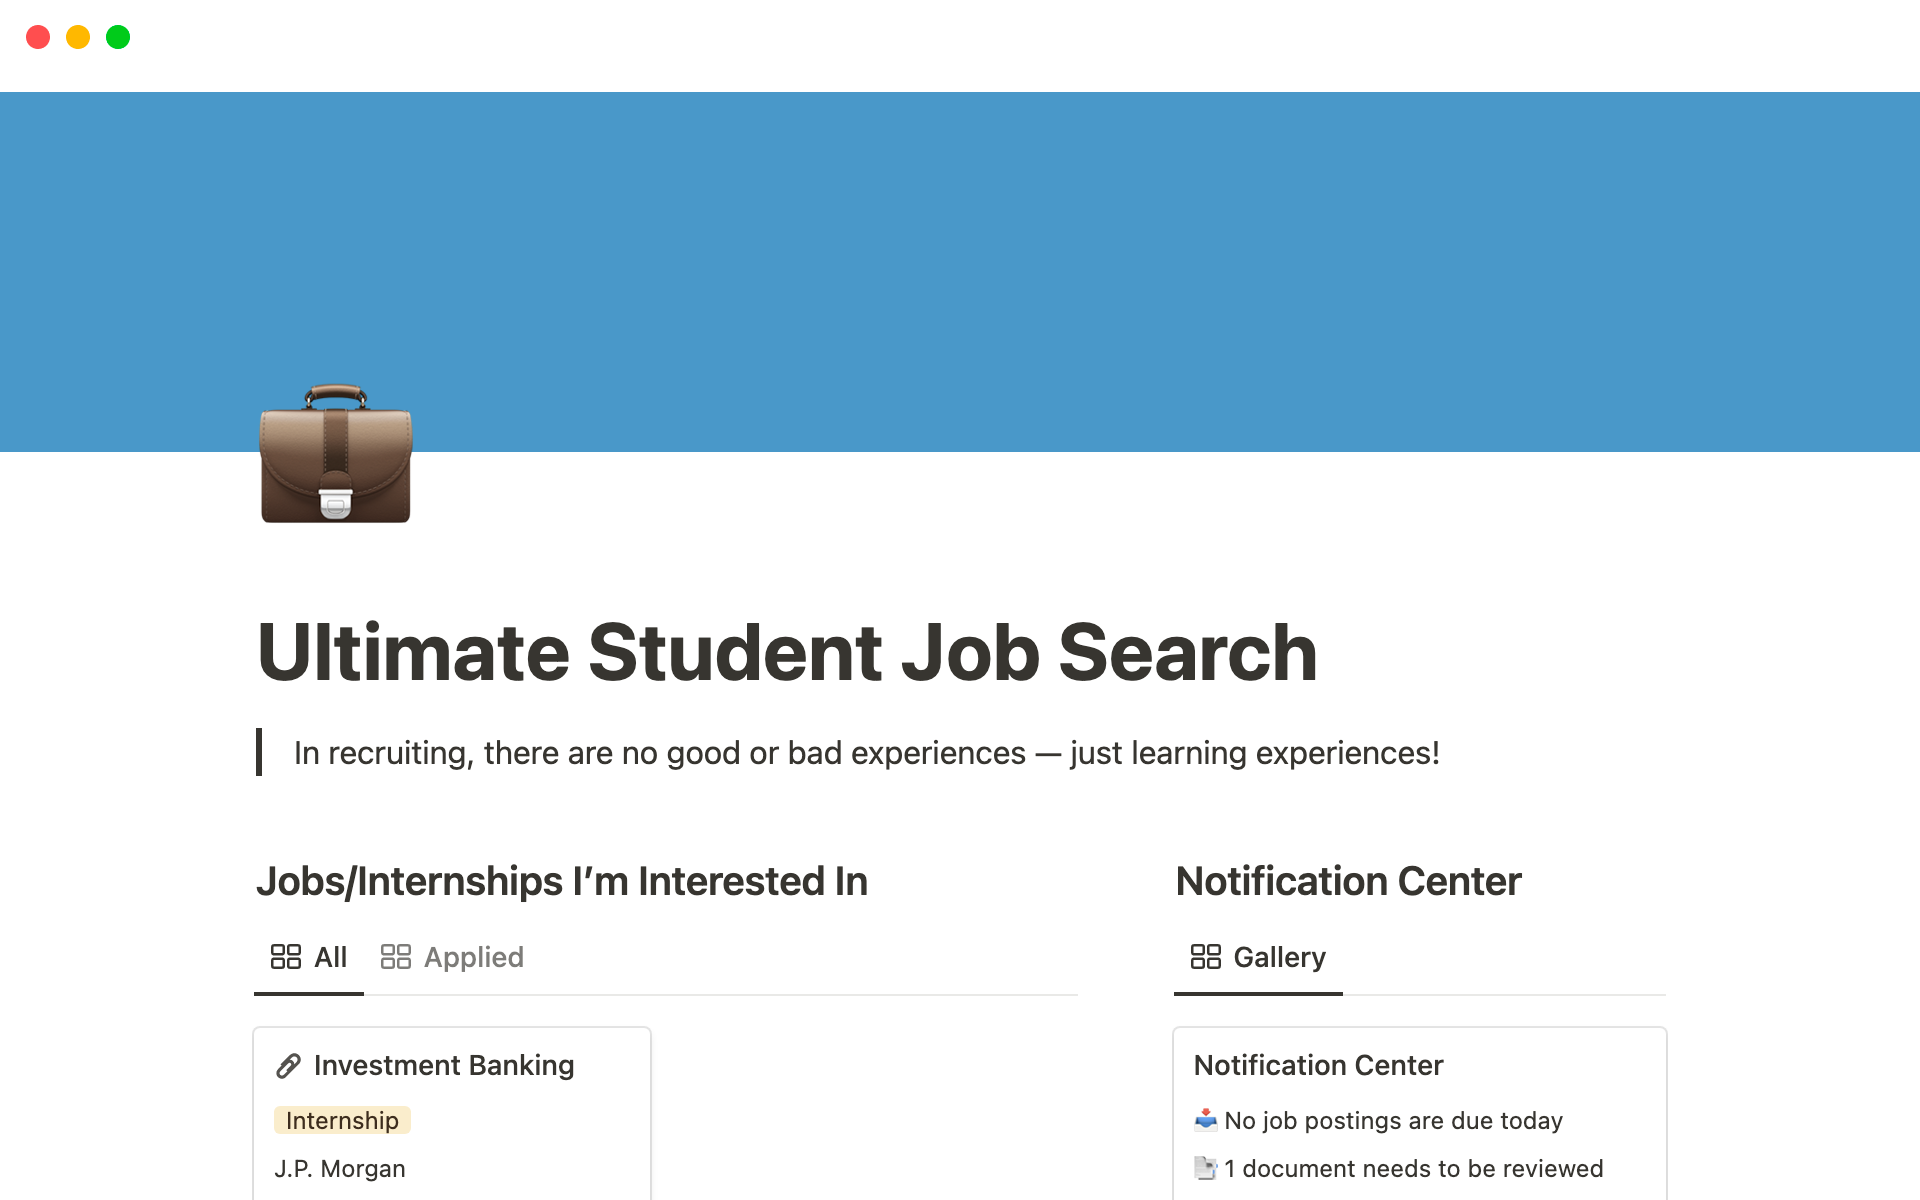 This template helps you track and plan your internship/job search as a student.